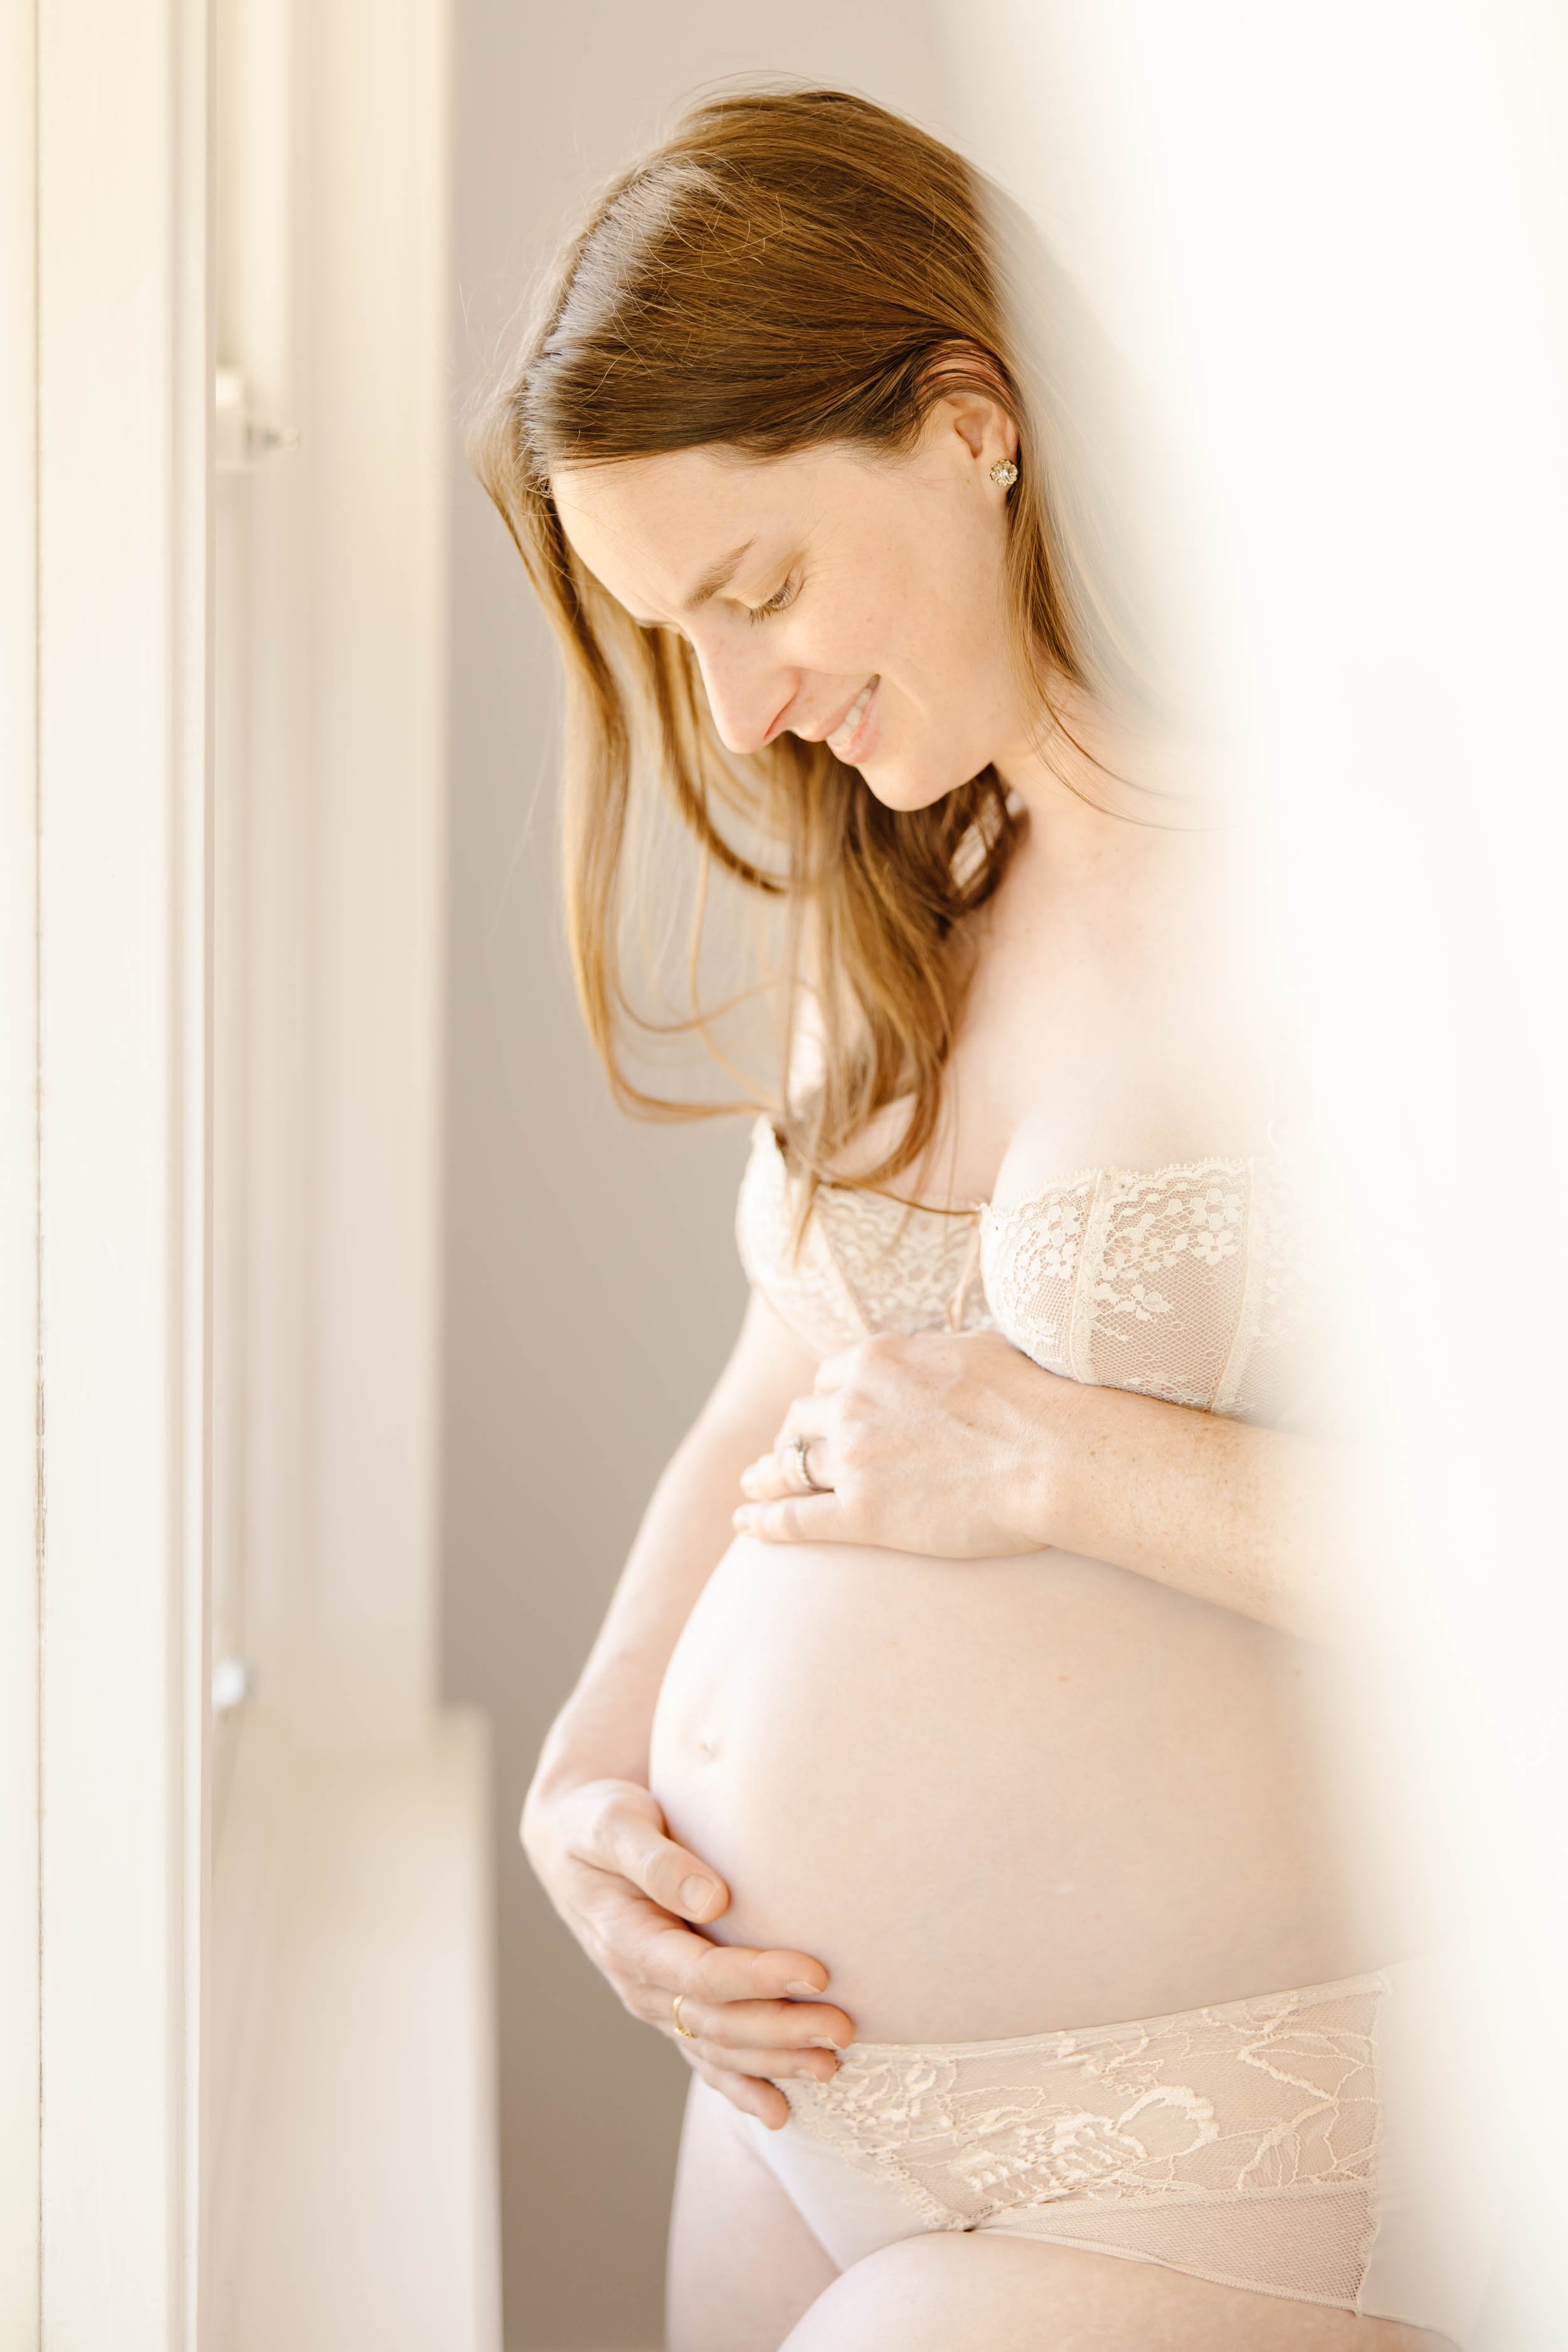 Perth_in_home_photographer_maternity_003.jpg